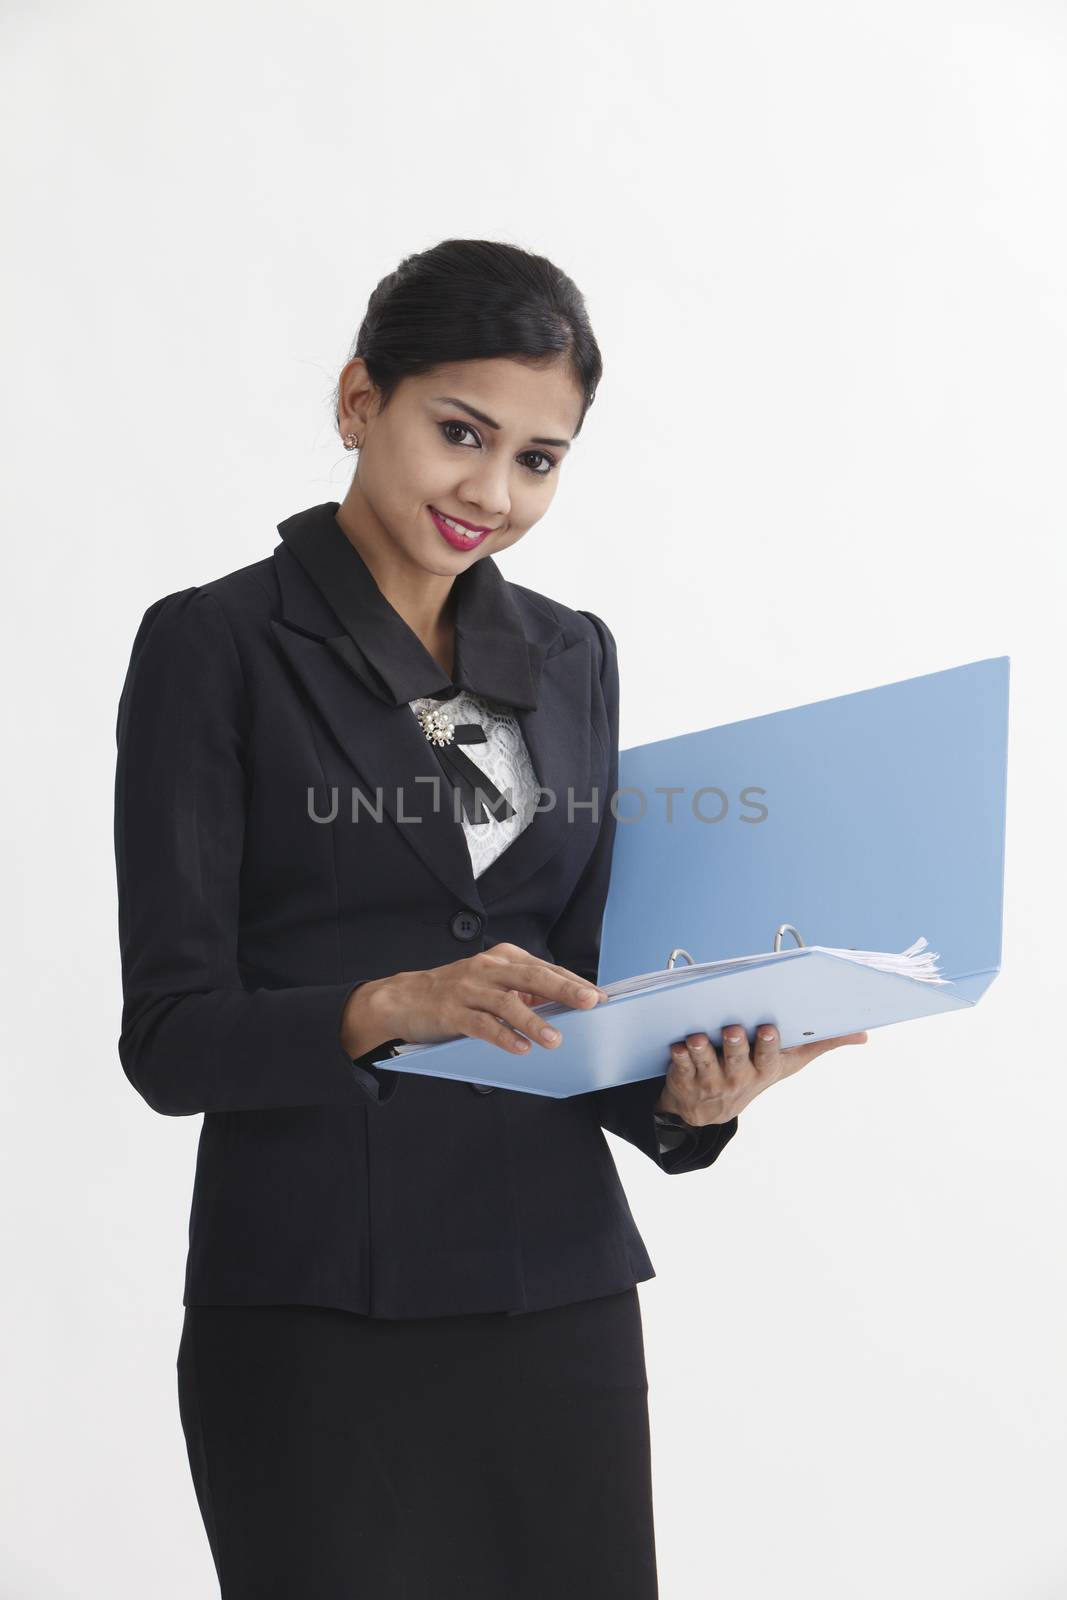 business woman holding business file